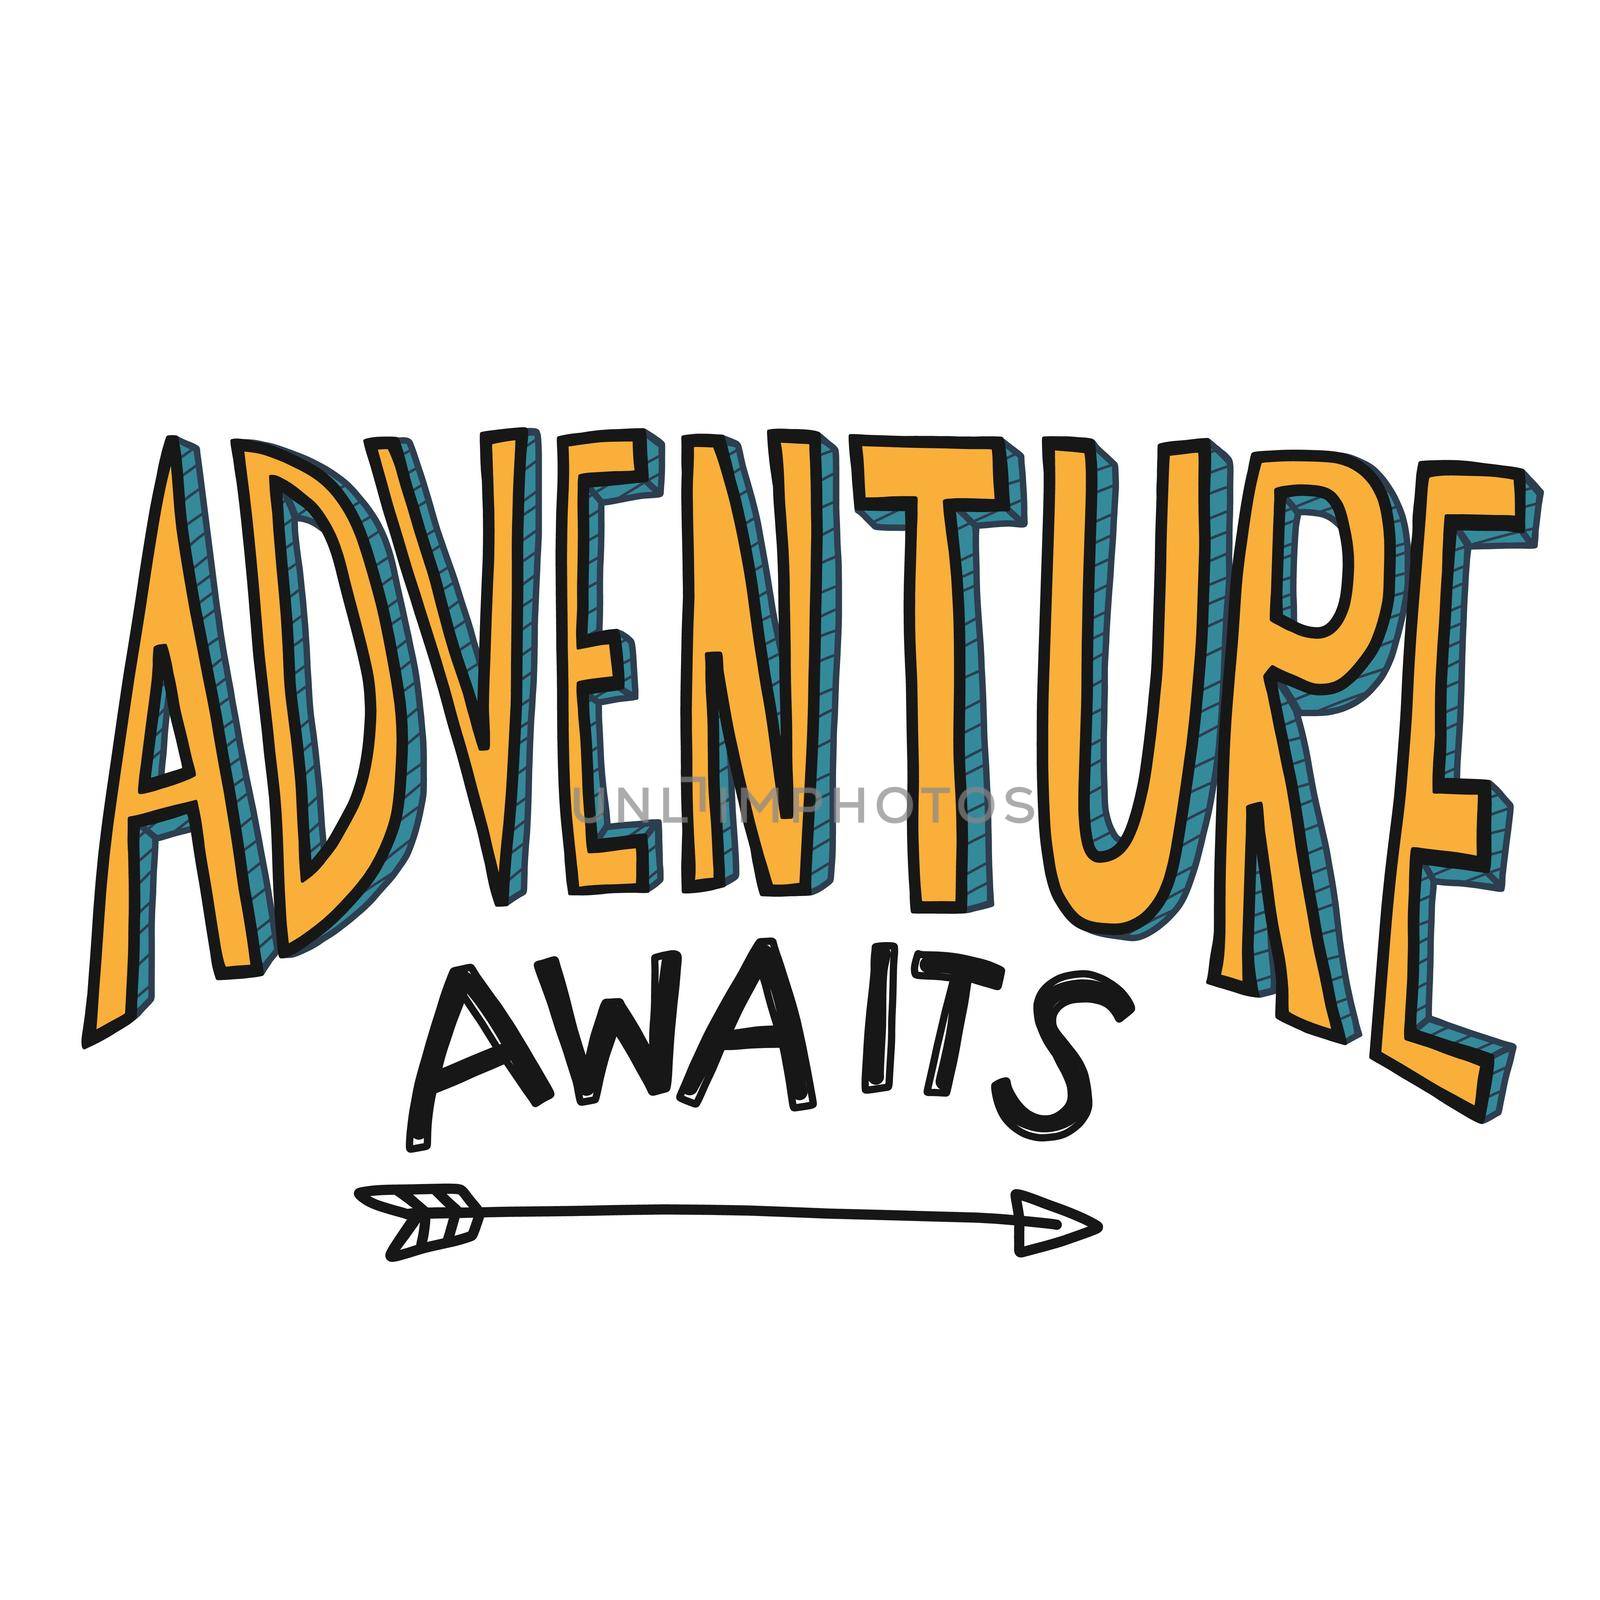 Adventure awaits word vector illustration yellow color cartoon font style by Yoopho